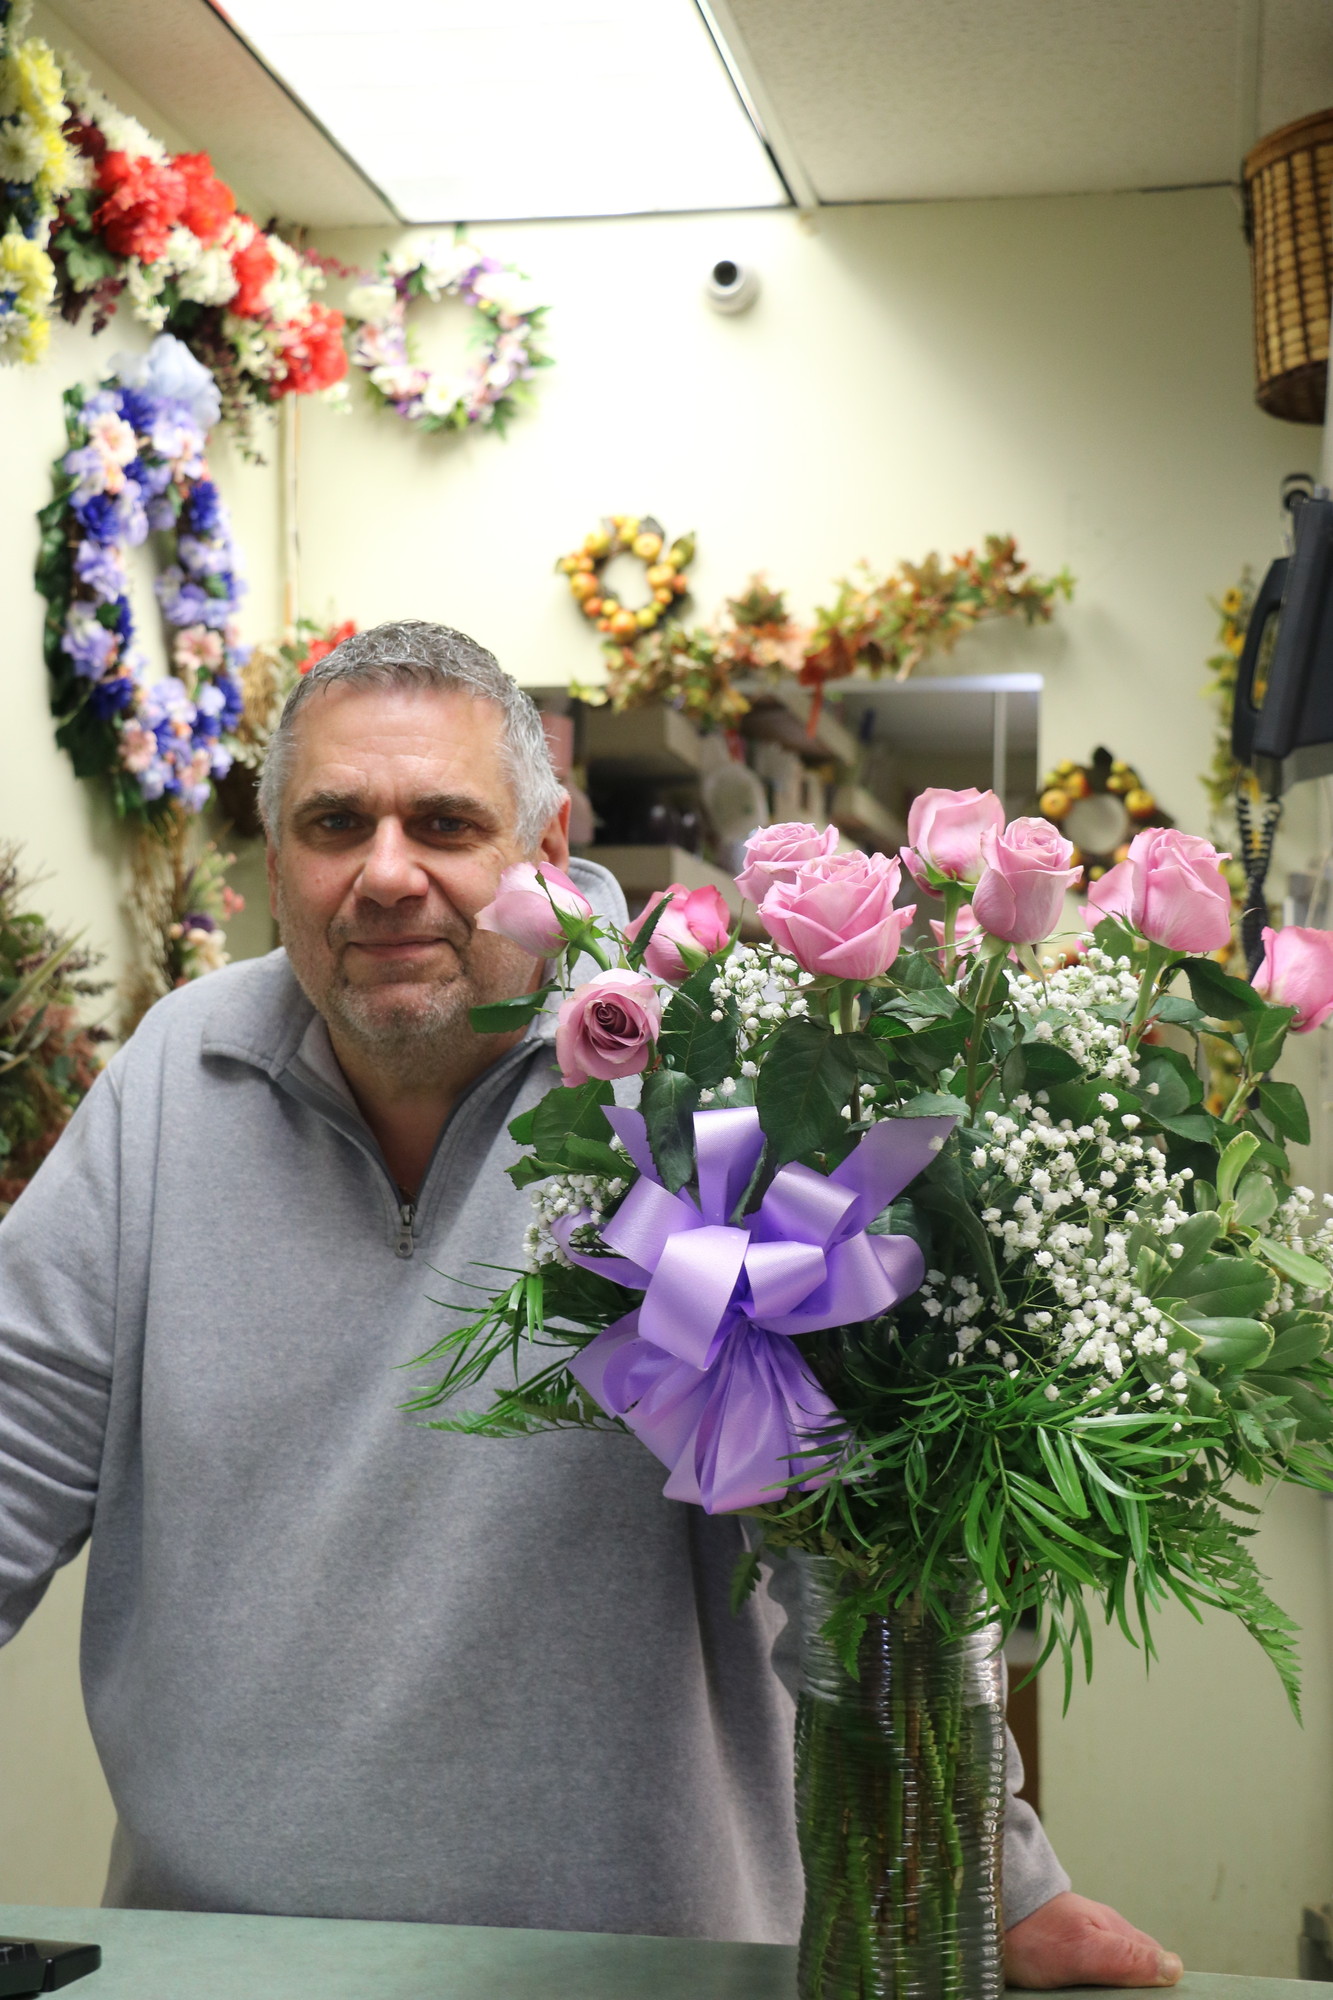 Bury says his biggest sellers are roses, and there are many plants, balloons and other gift items for sale in his store at 347 Hempstead Ave., Malverne.